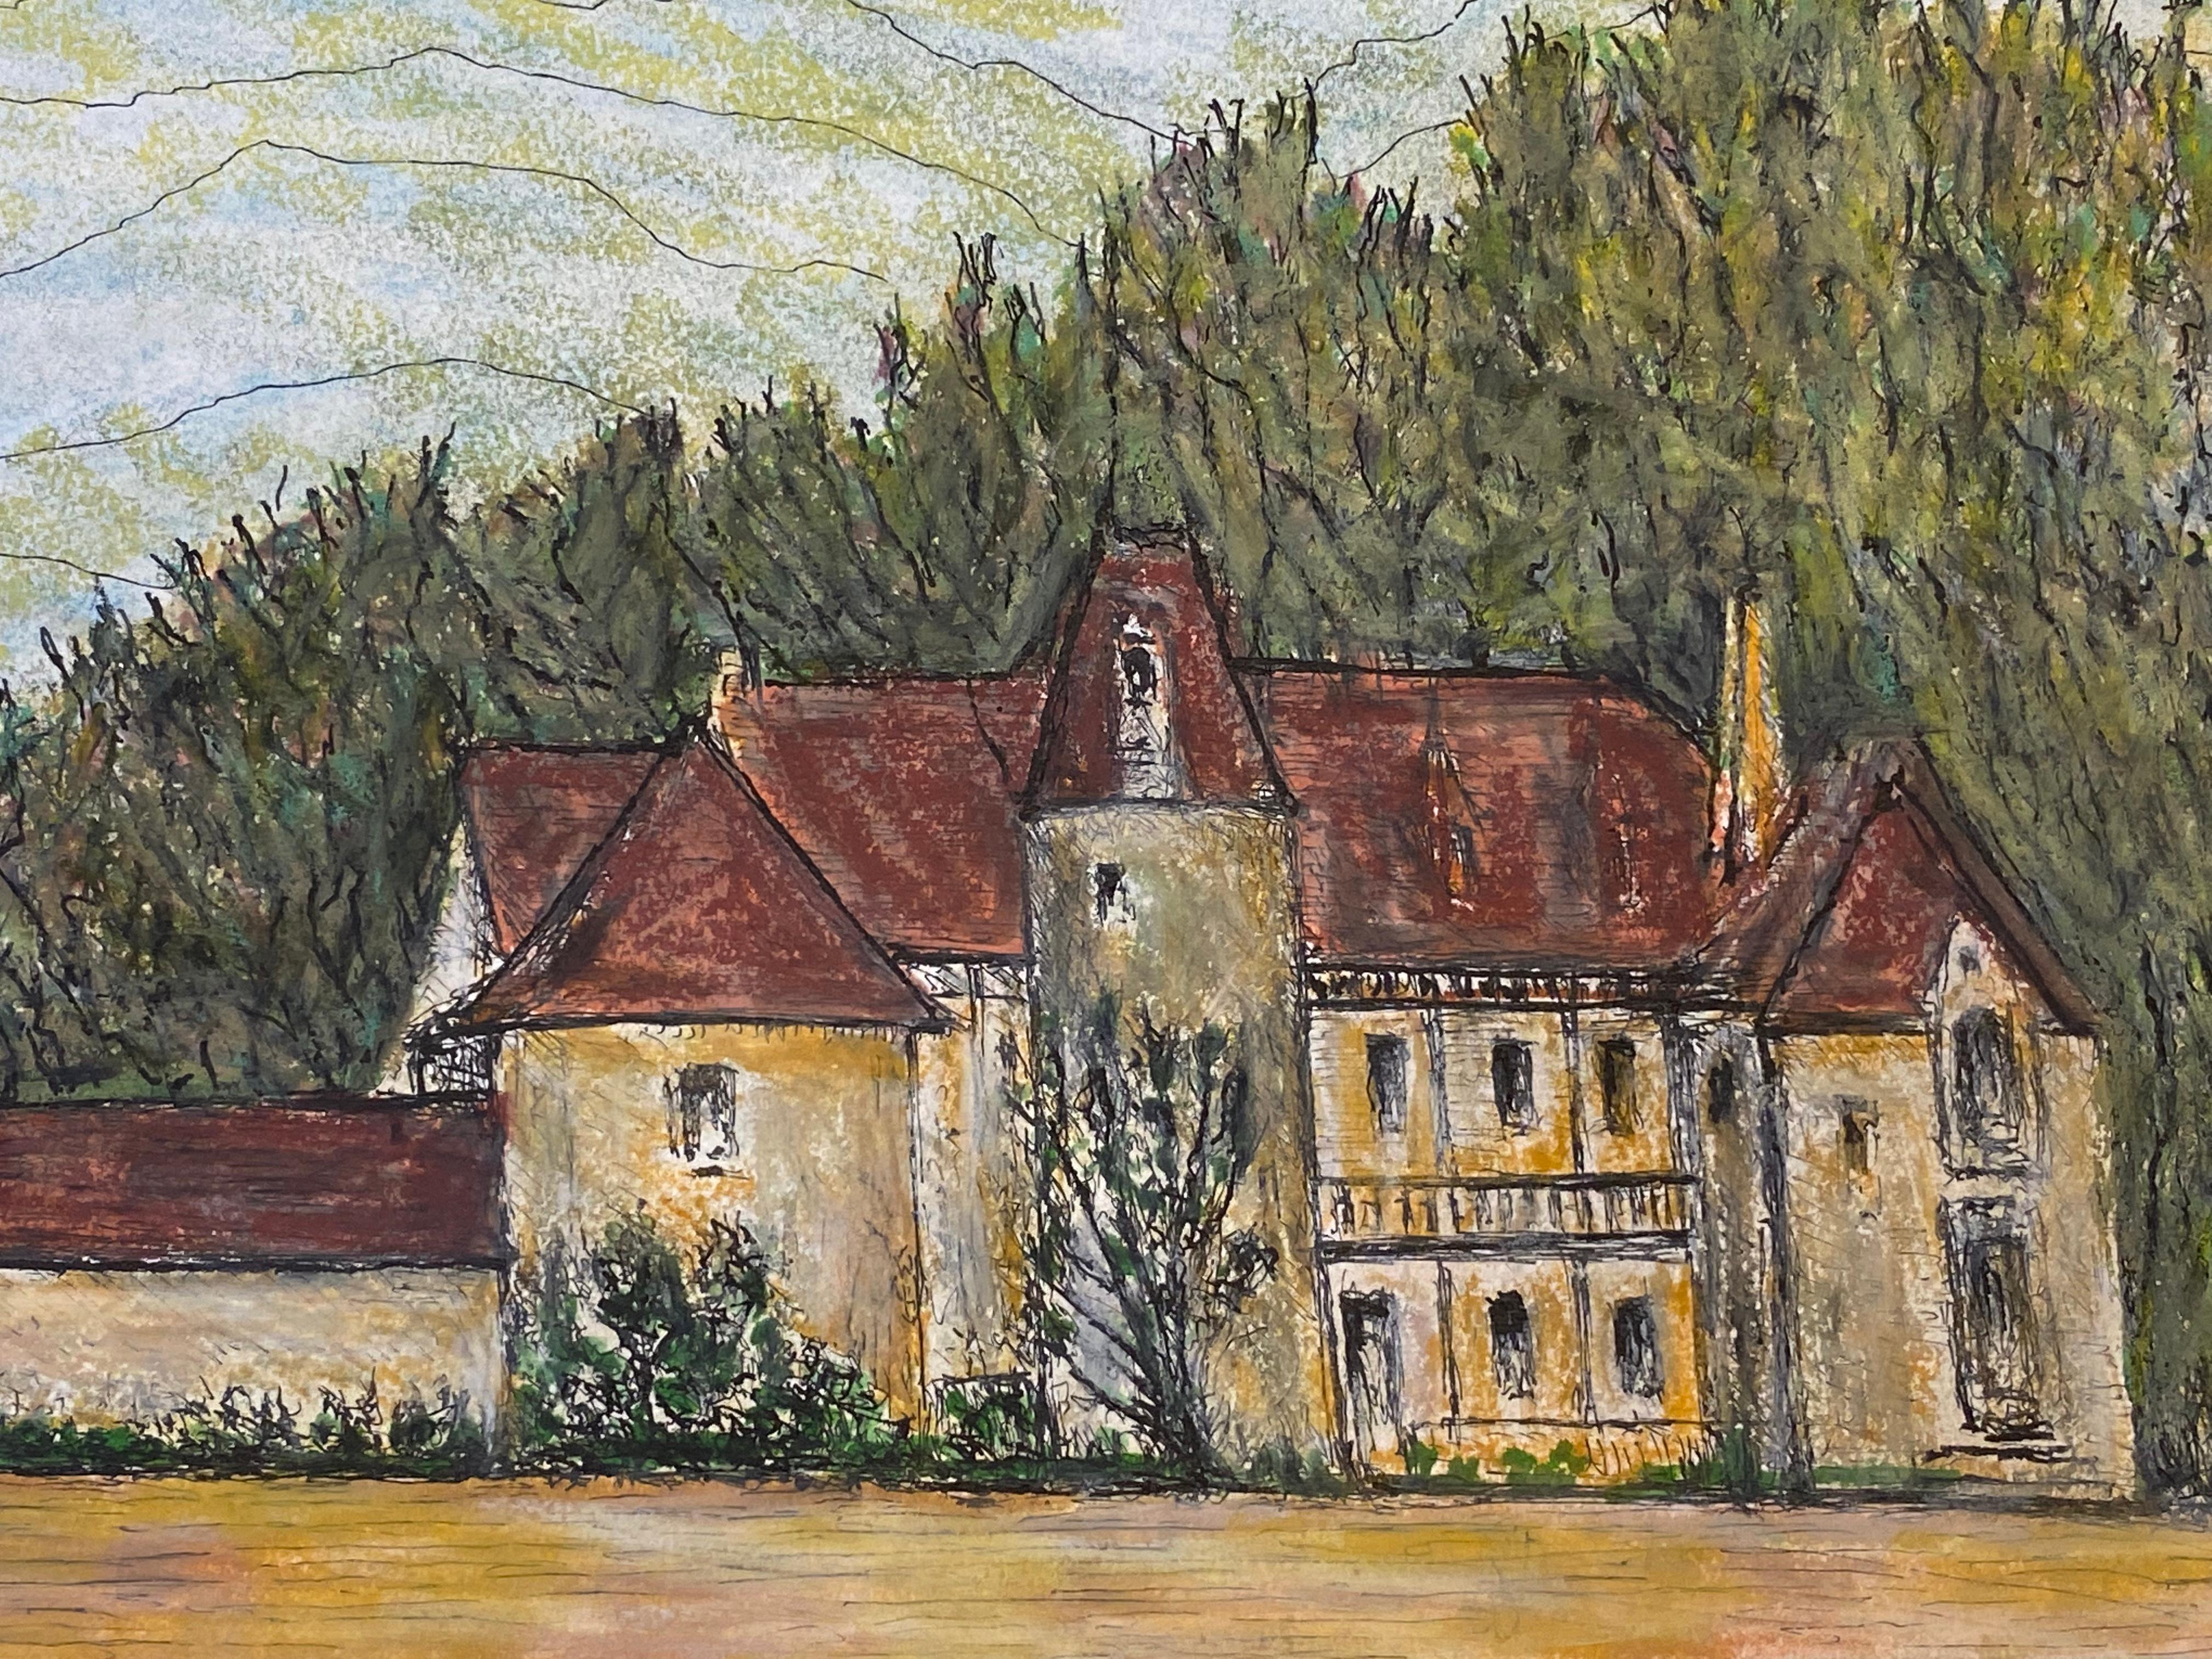 French Chateau
by Bernard Labbe (French mid 20th century)
signed original watercolour/ gouache painting on artist paper, unframed
size: 13 x 15 inches
condition: very good and ready to be enjoyed. 

provenance: the artists atelier/ studio, France